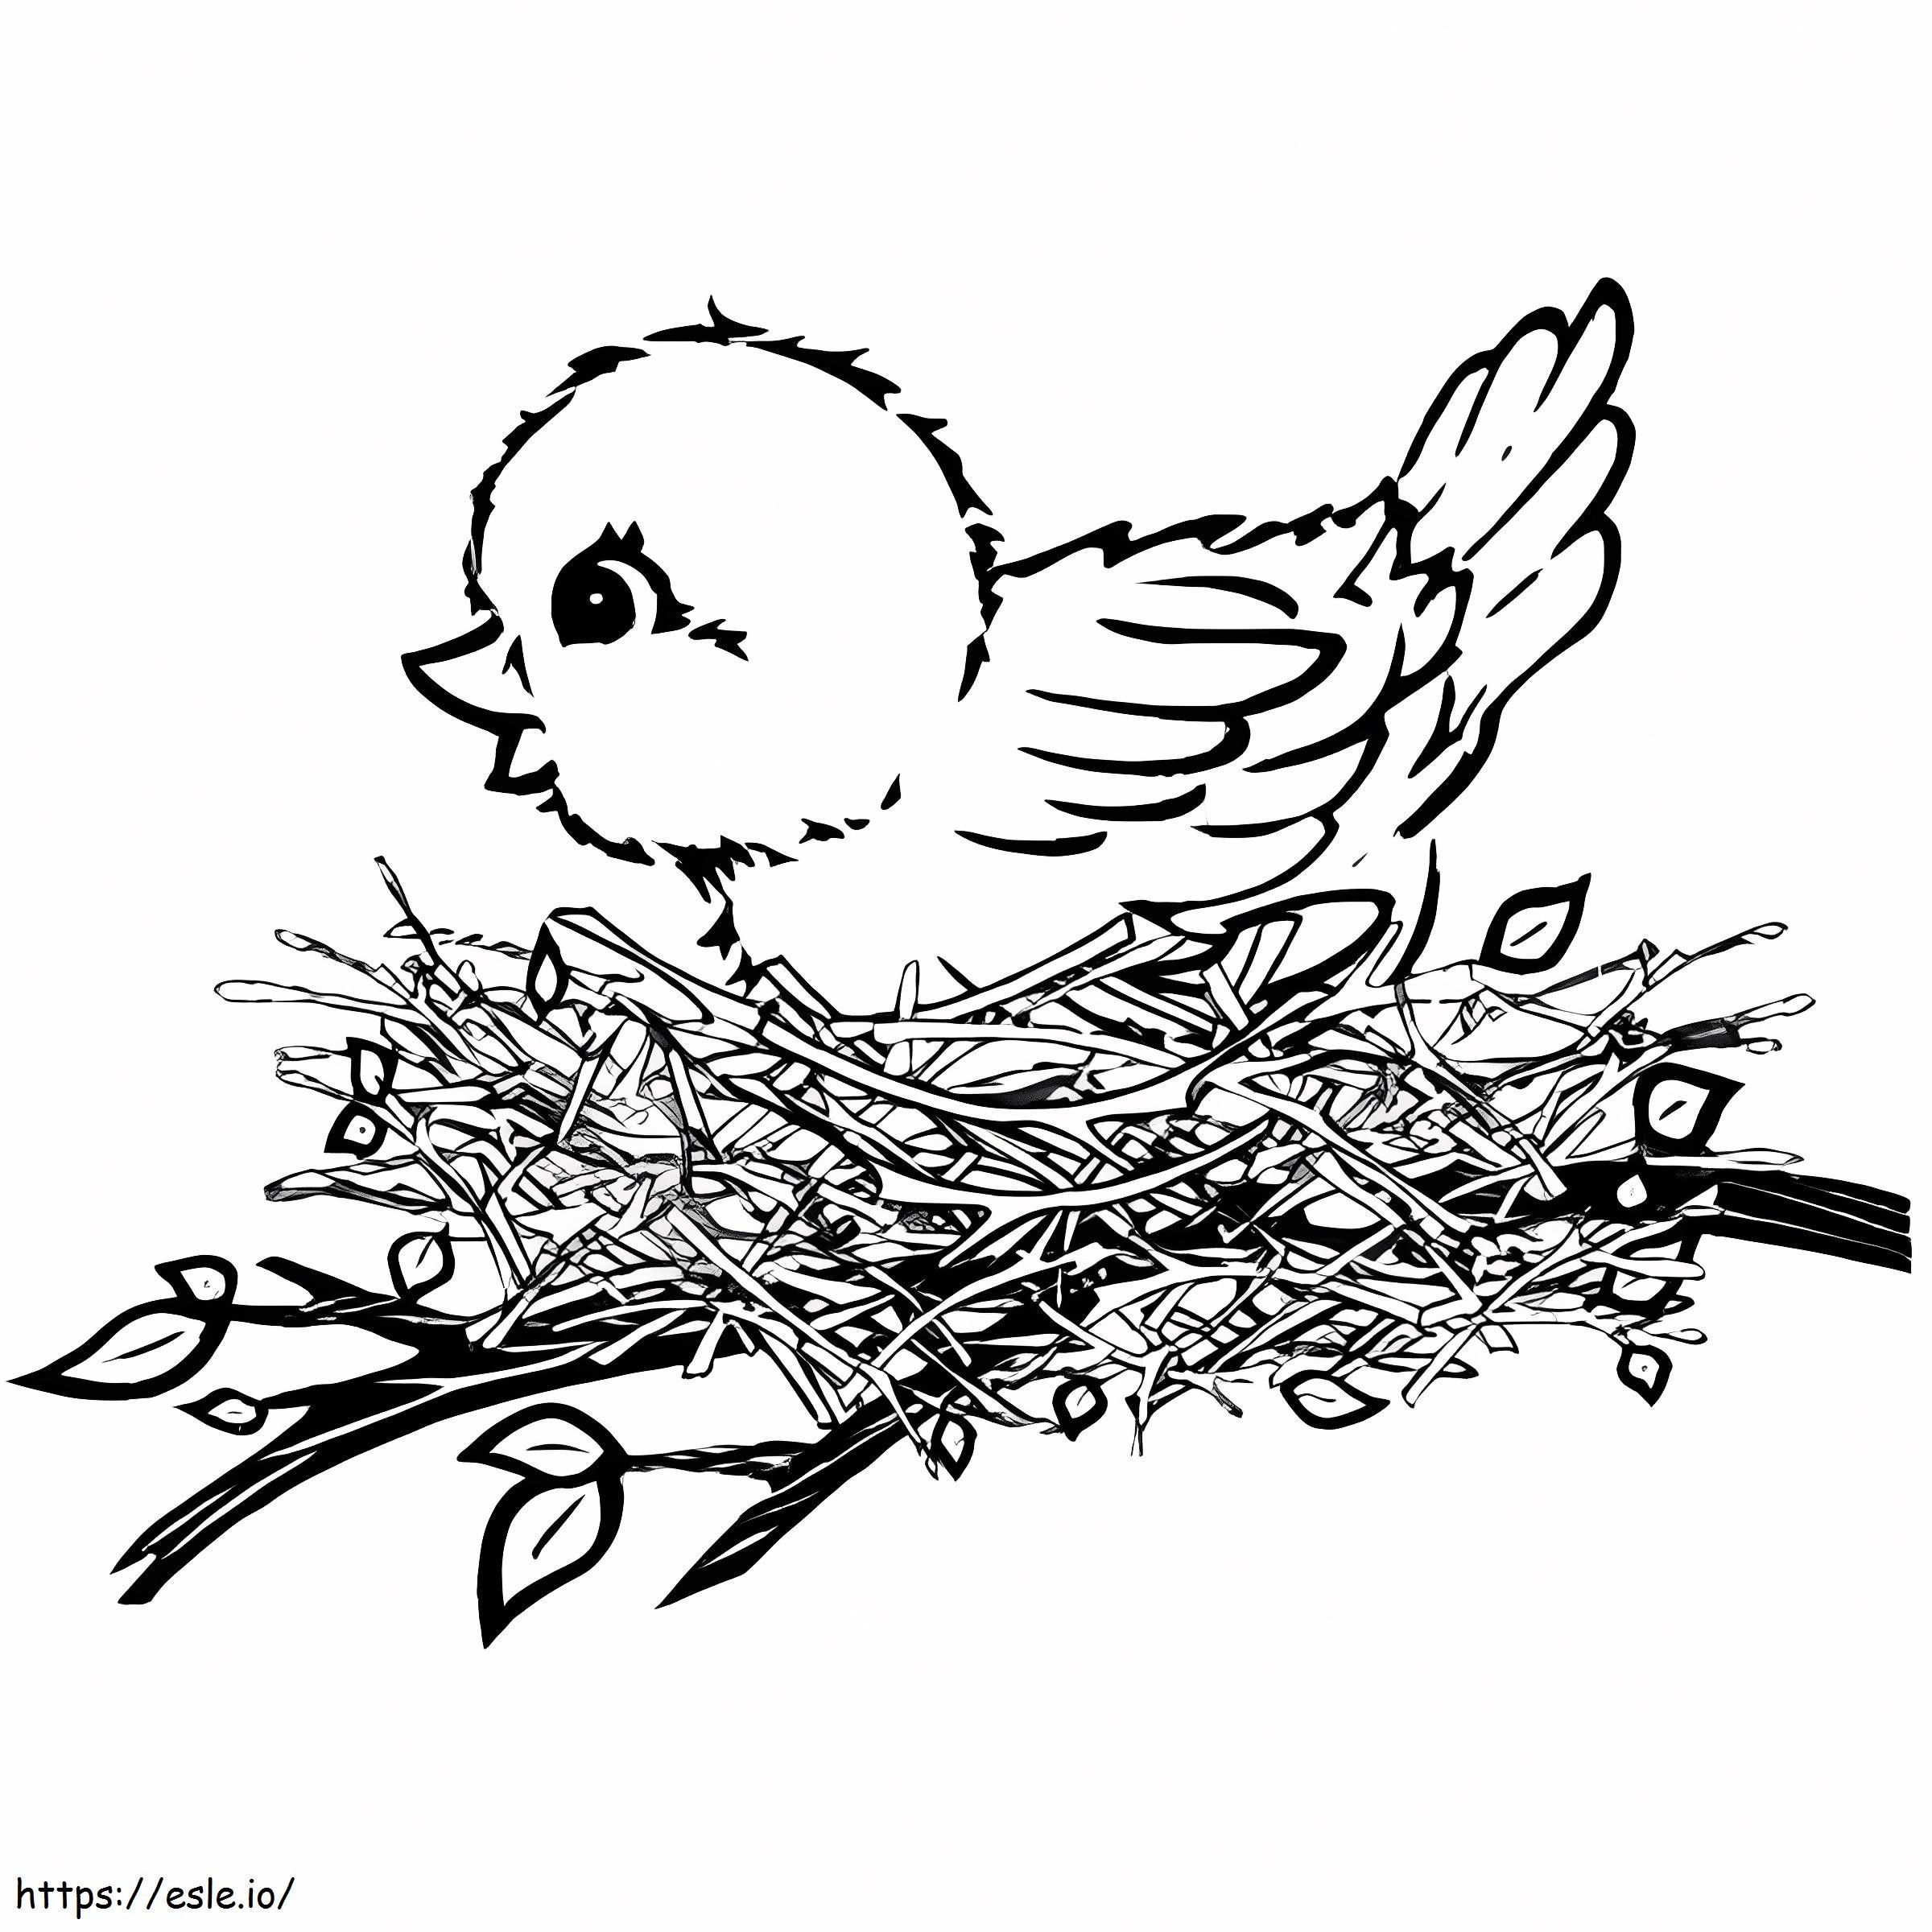 Canaries In The Nest coloring page